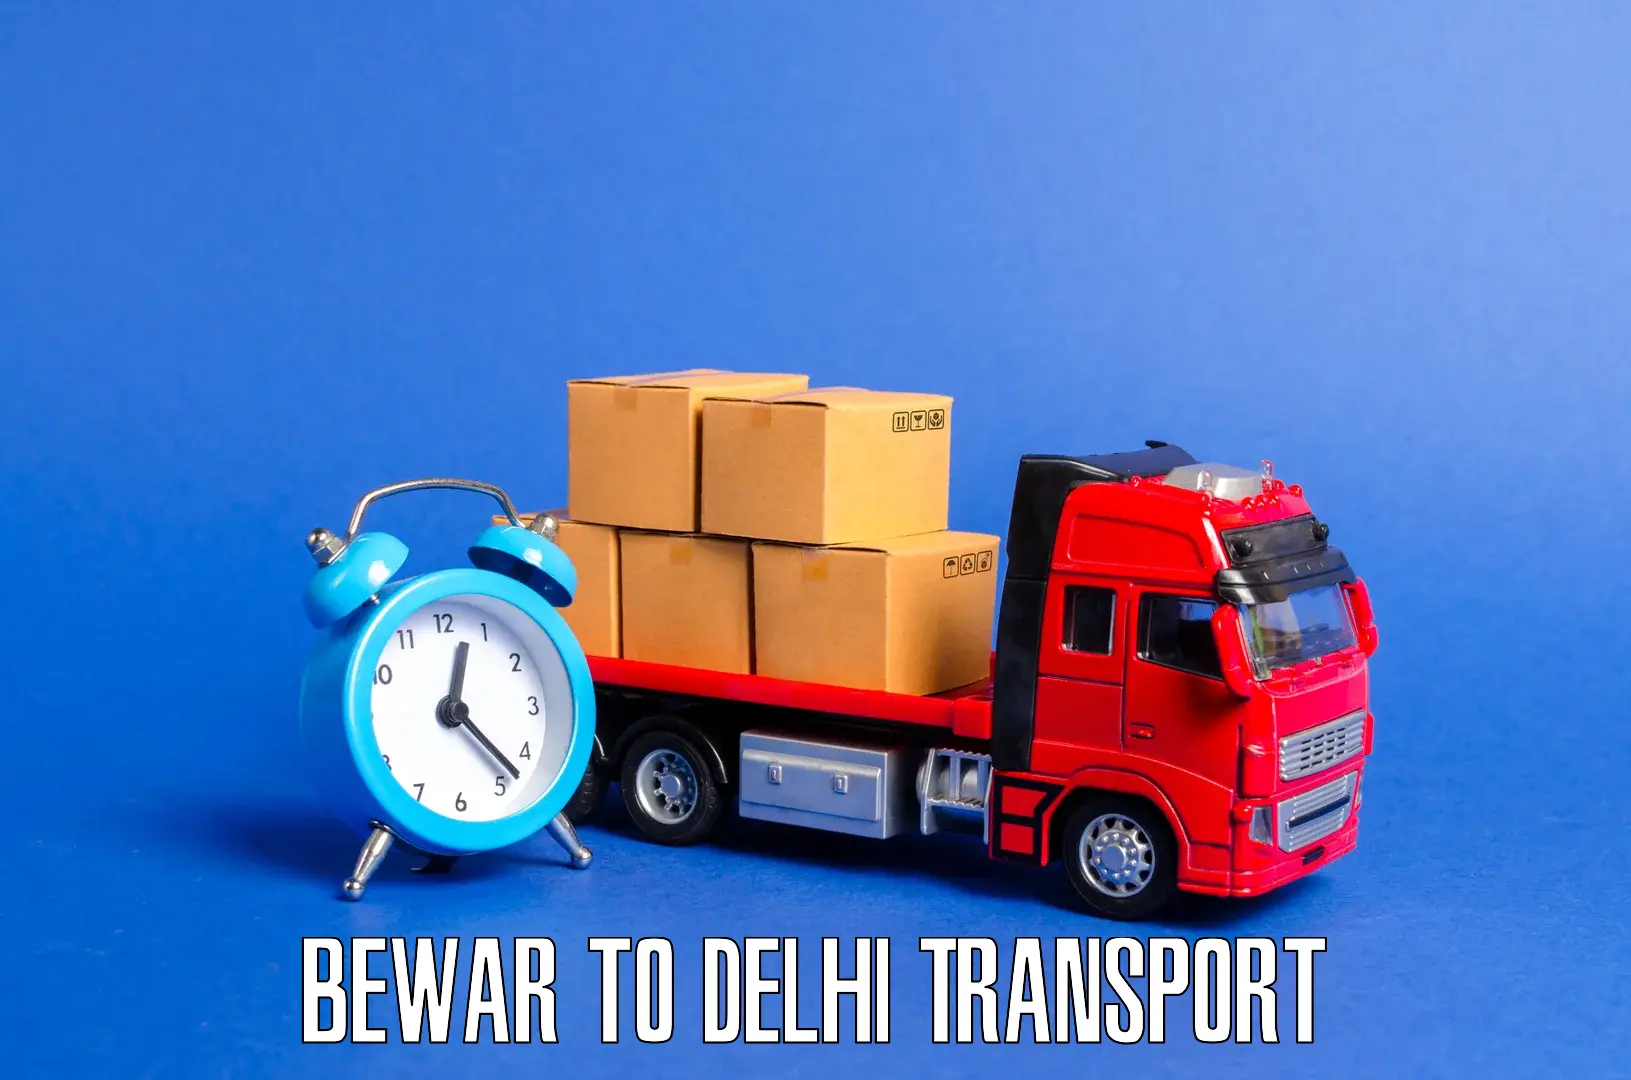 Nearby transport service Bewar to Lodhi Road